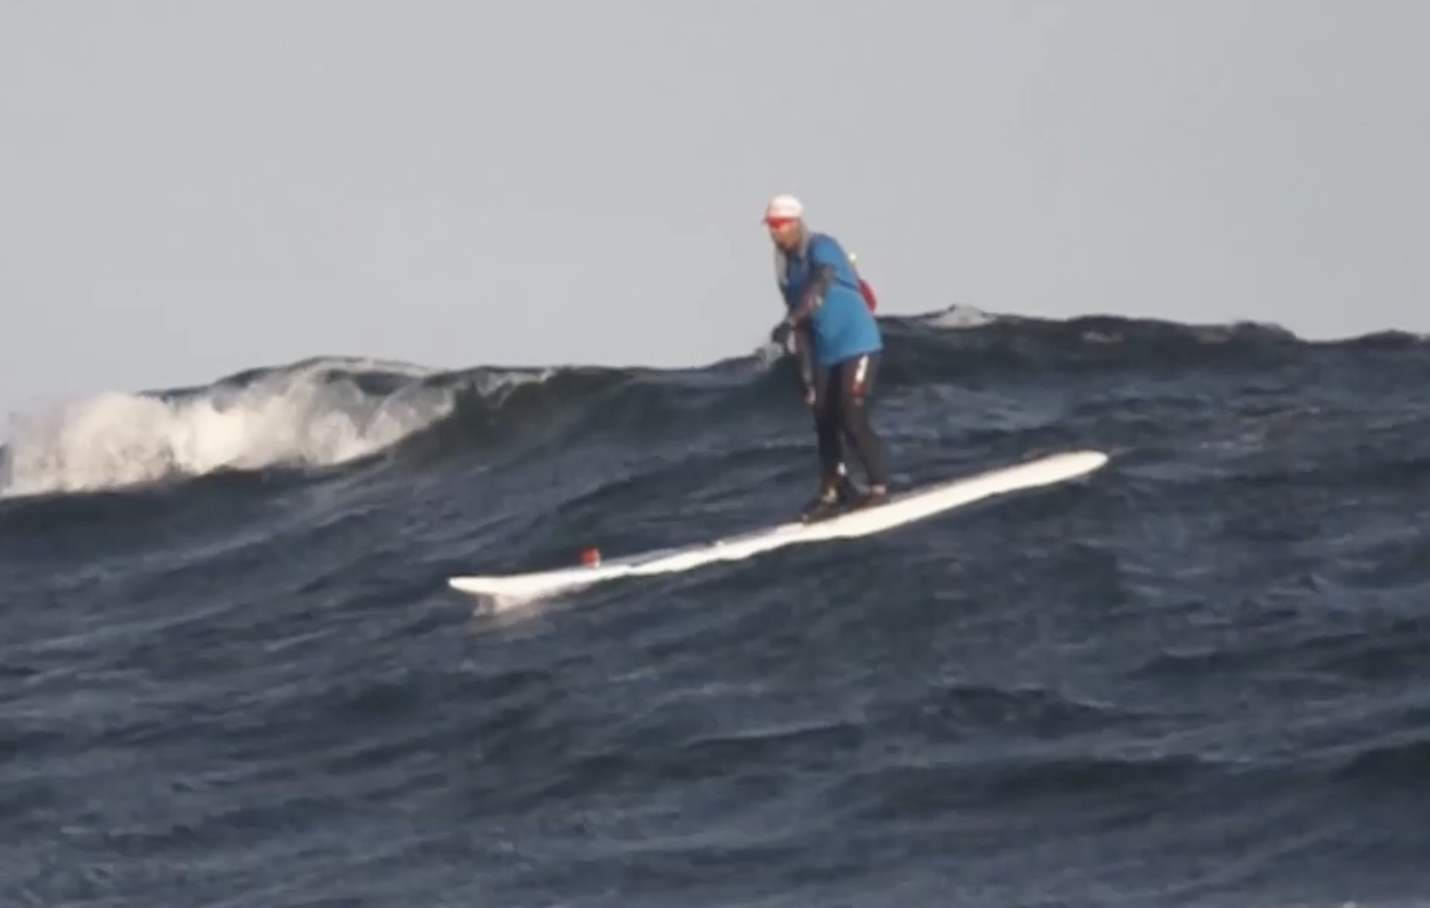 The SUP Crossing with Chris Bertish